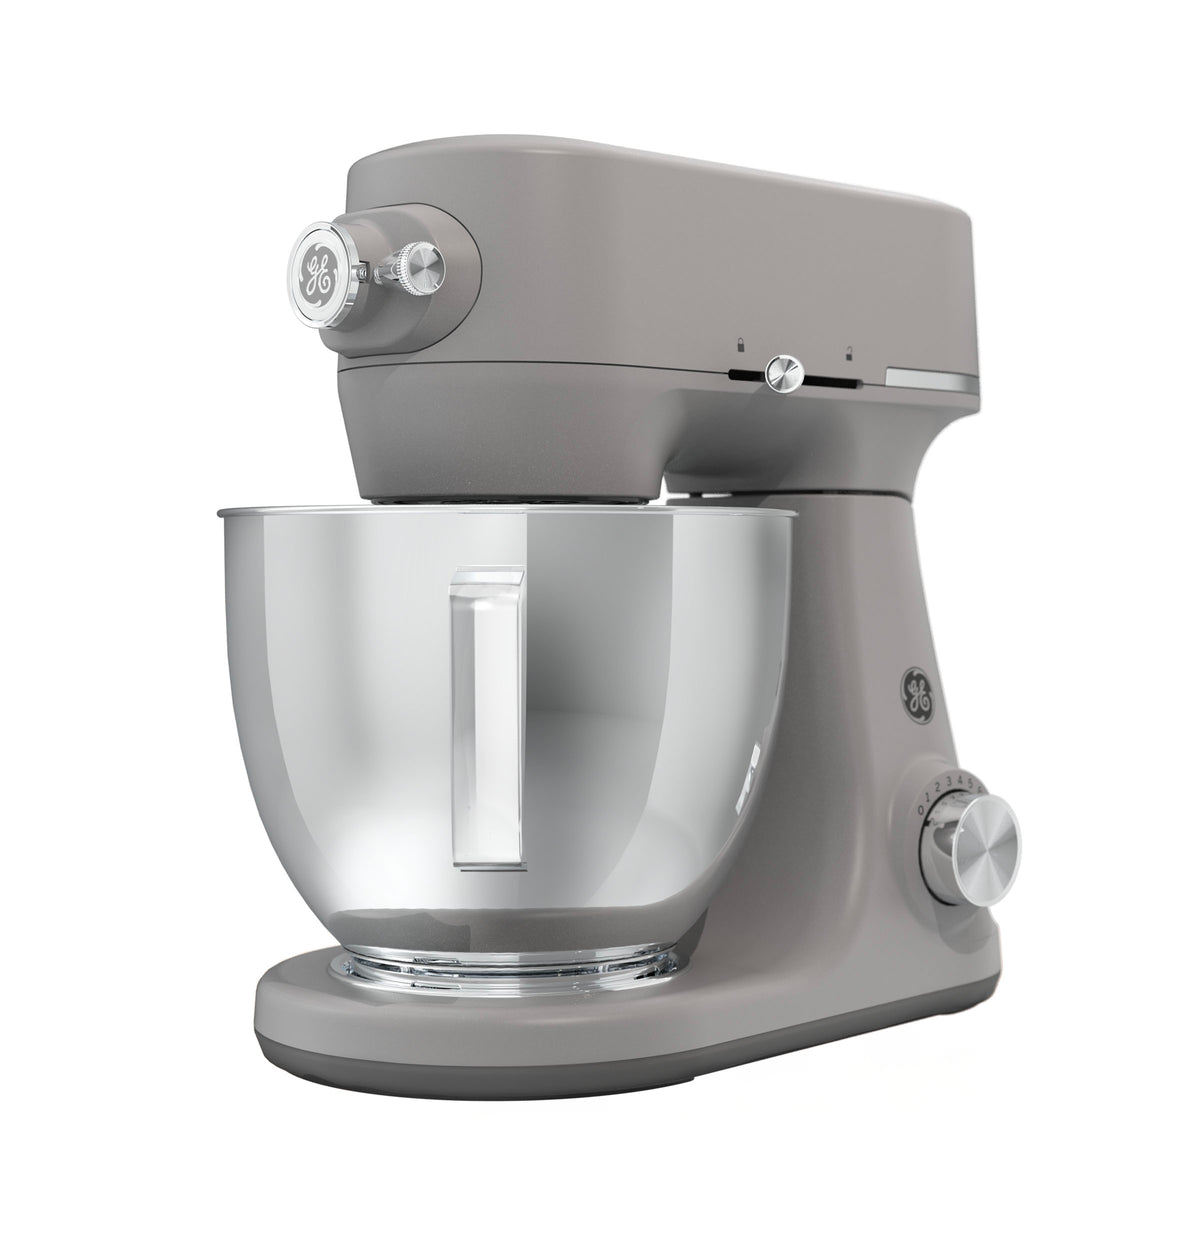 https://www.geaprus.shop/wp-content/uploads/1693/74/explore-our-collection-of-ge-stand-mixer-ge-appliances-pr-online-store-that-will-help-you-become-the-best-that-you-can-be_1.jpg